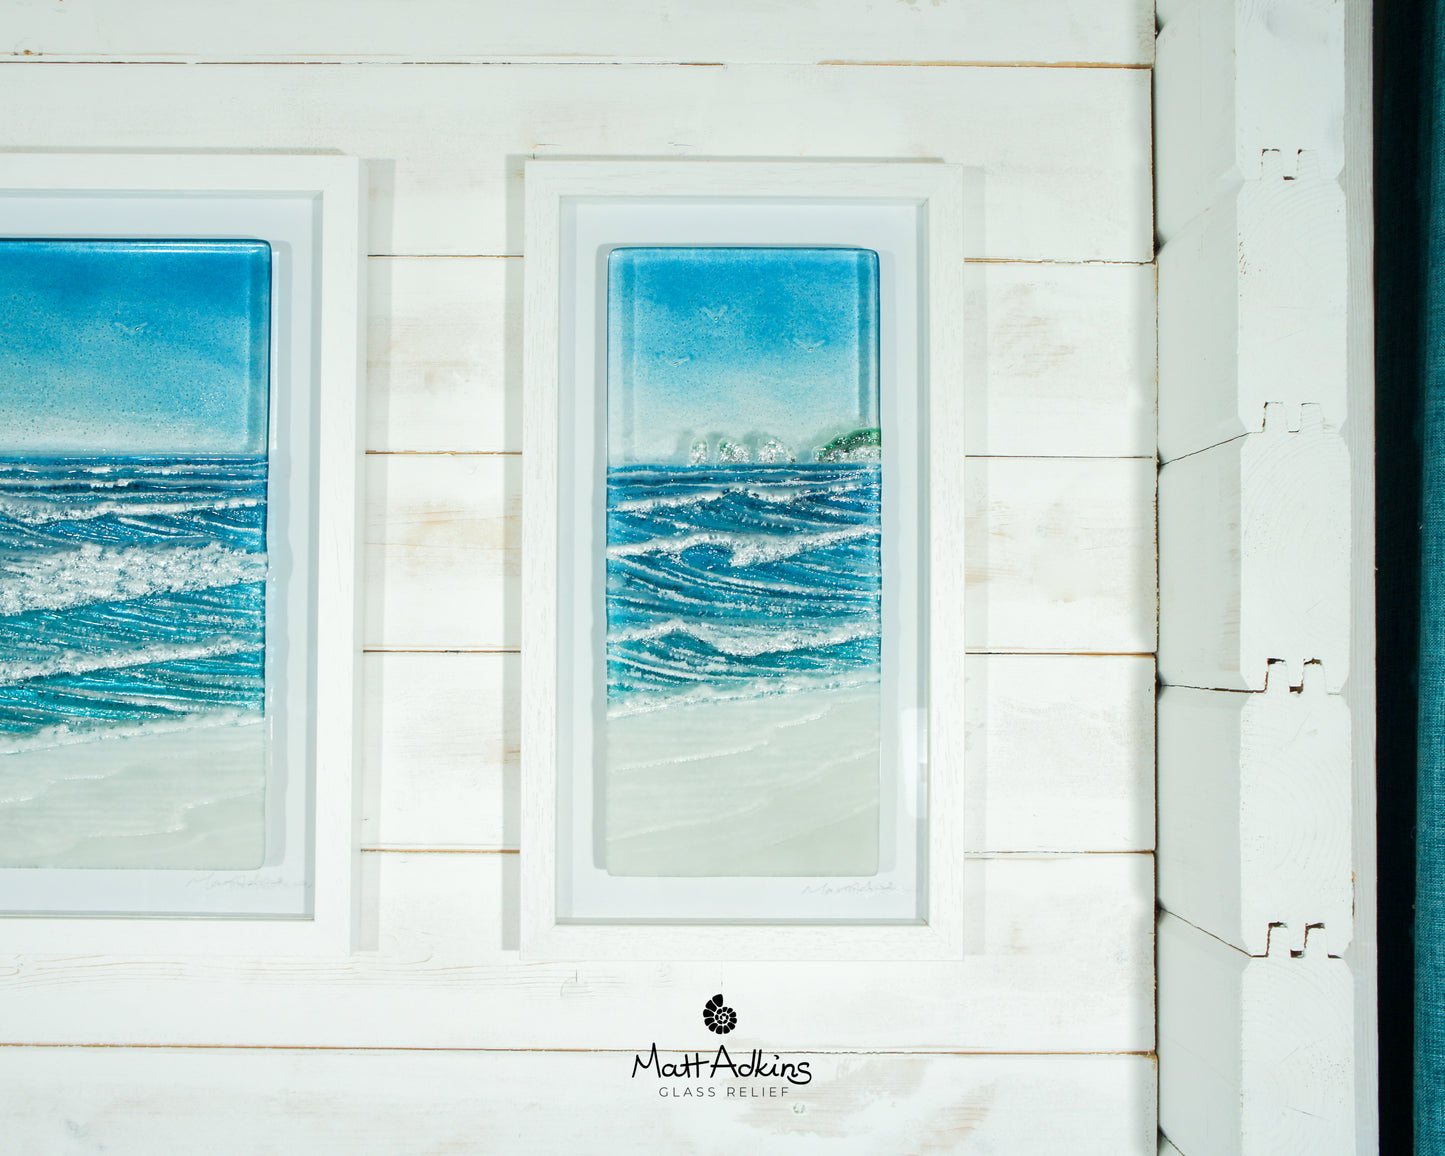 Triptych of Lighthouse Wave Frames - 2 at 25cmx45cm(10x17") + 1 at 45x45cm(17x17") | 3 Wave Large Sea Beach Lighthouse Fused Glass Frames